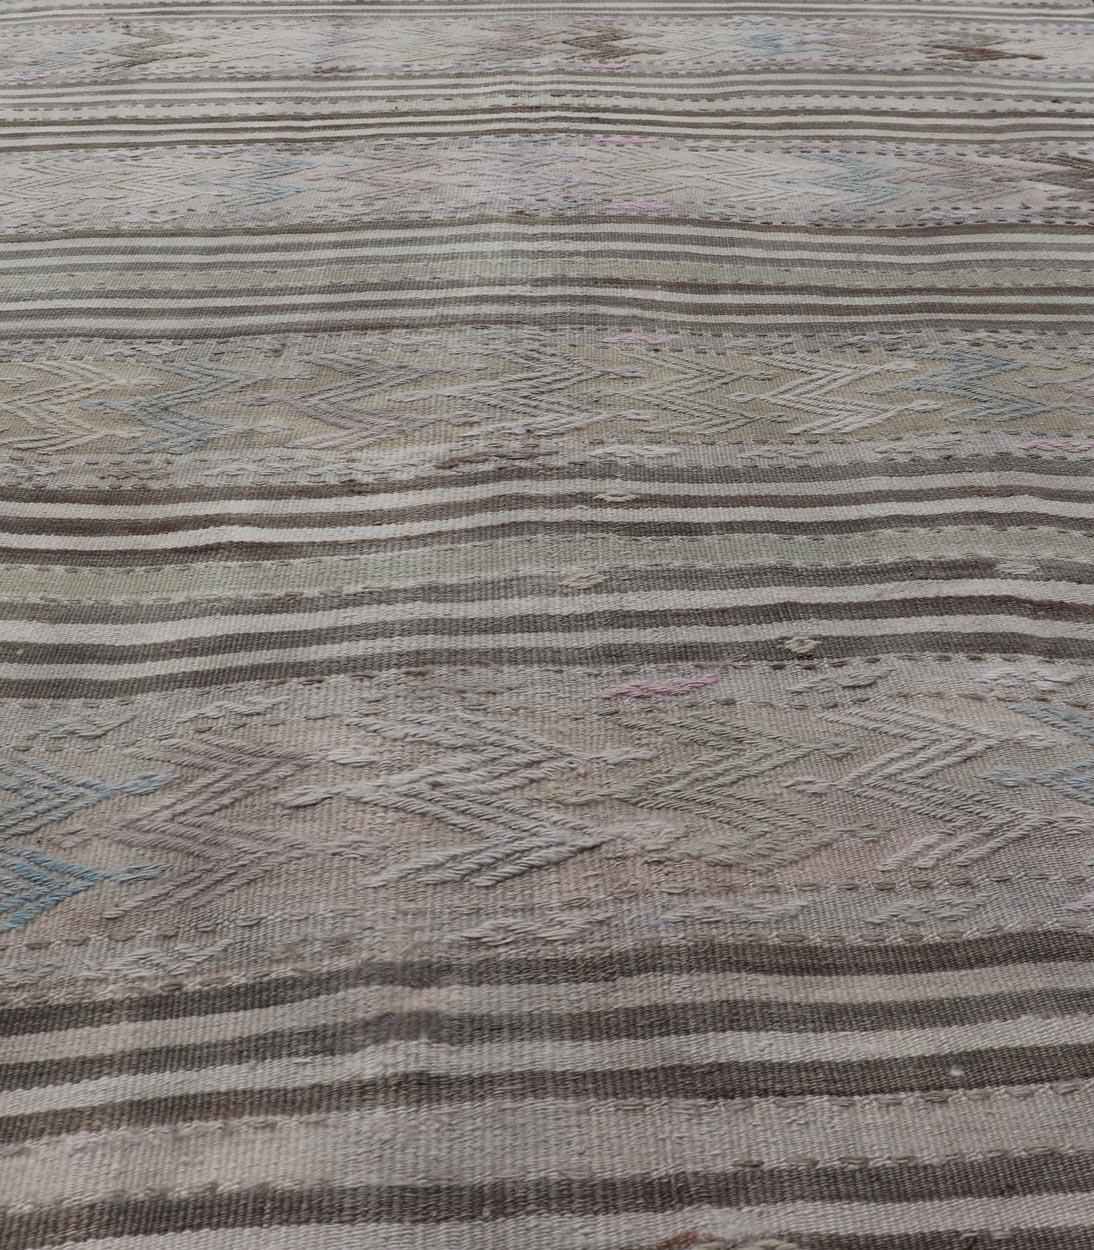 Vintage Turkish Flat-Weave Embroideries Kilim in Taupe, Lt. Blue, Brown, Tan In Good Condition For Sale In Atlanta, GA